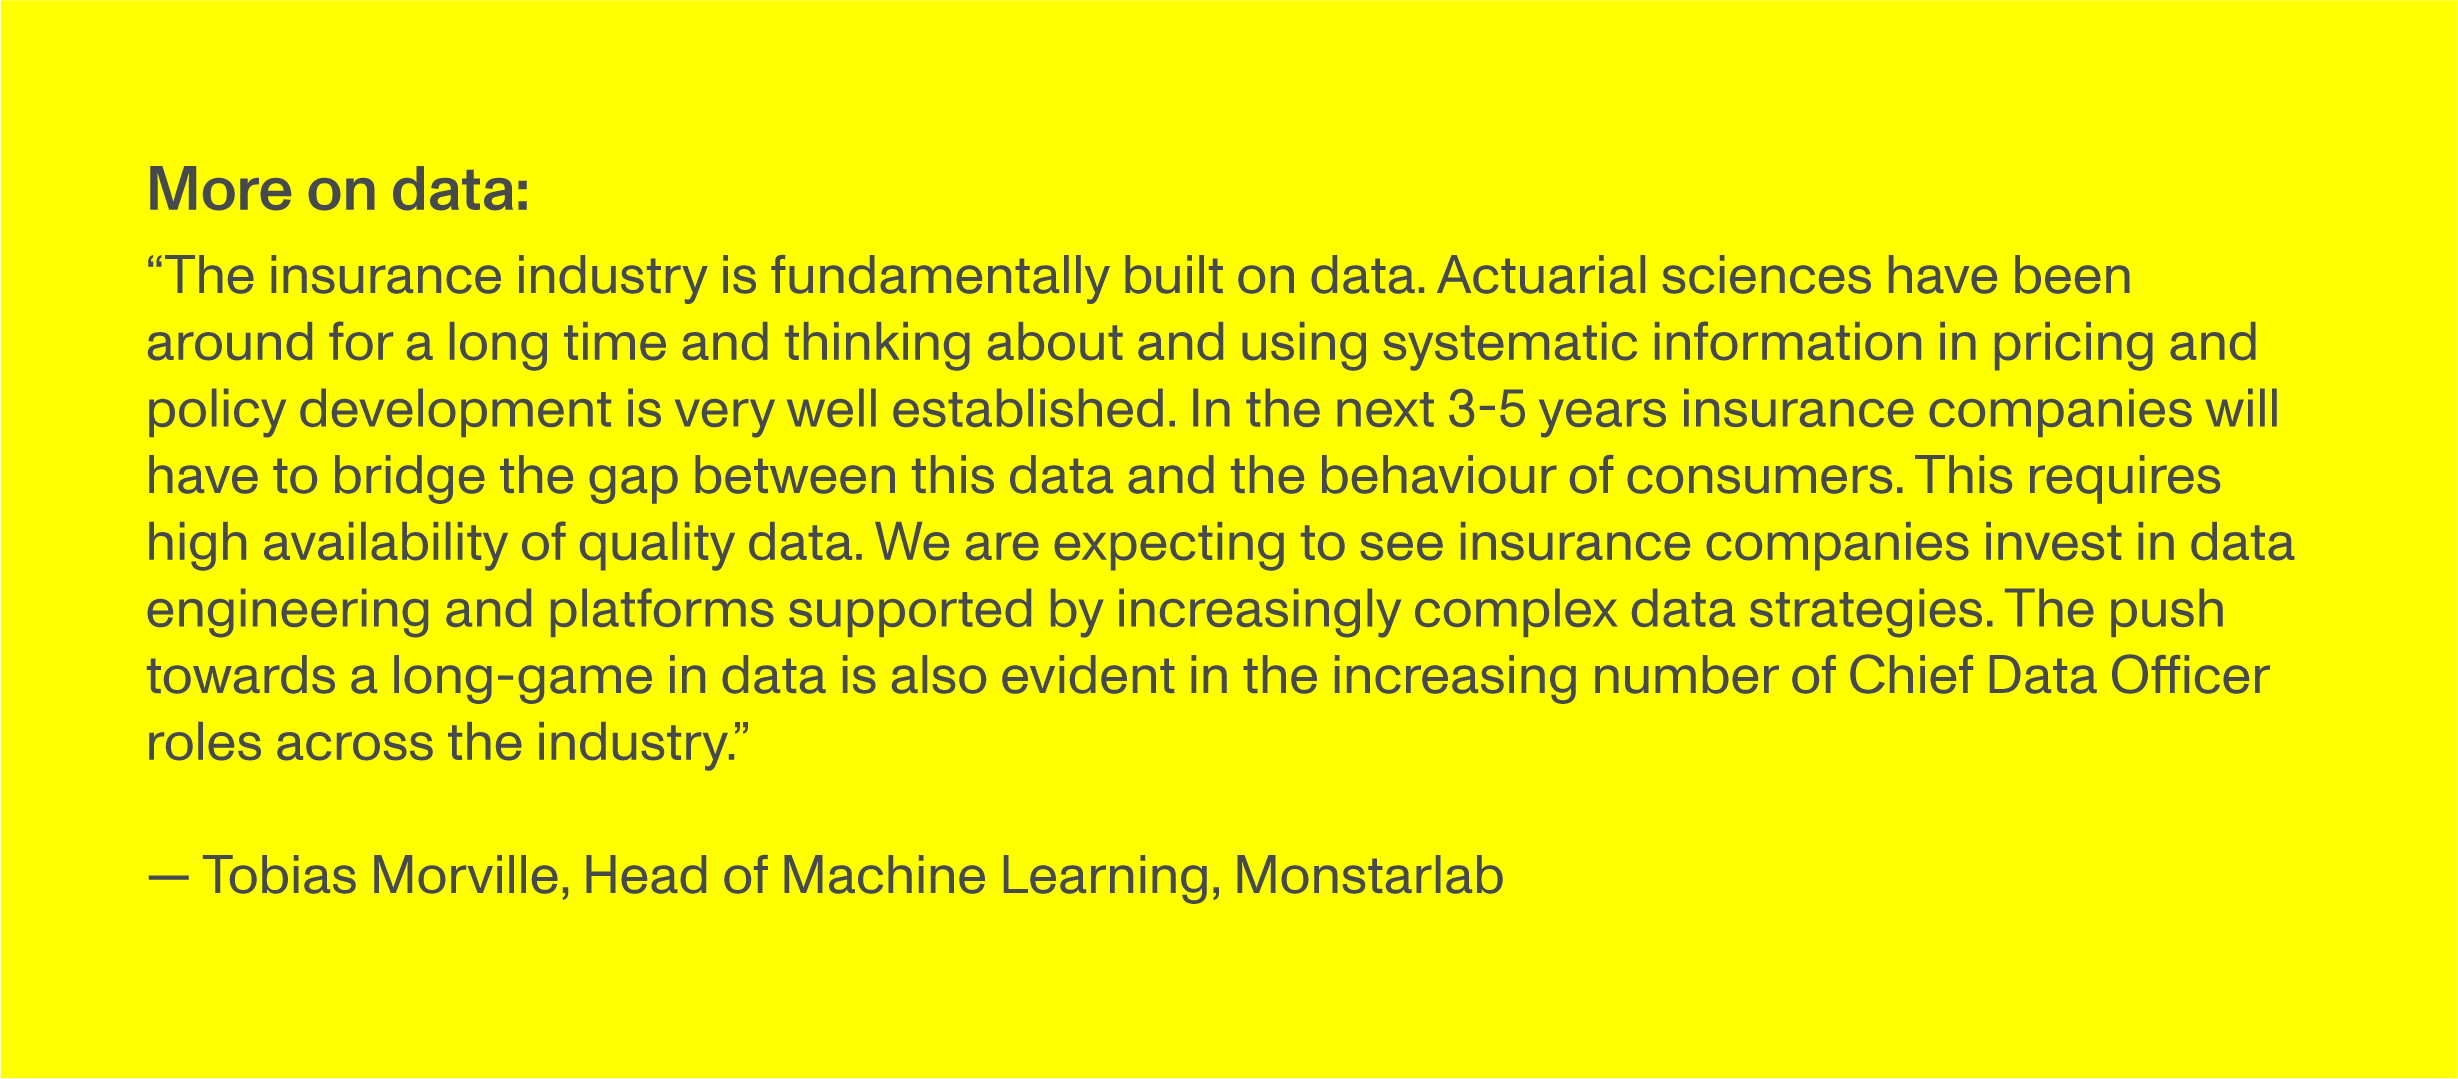 More on data: “The insurance industry is fundamentally built on data. Actuarial sciences have been around for a long time and thinking about and using systematic information in pricing and policy development is very well established. In the next 3-5 years insurance companies will have to bridge the gap between this data and the behaviour of consumers. This requires high availability of quality data. We are expecting to see insurance companies invest in data engineering and platforms supported by increasingly complex data strategies. The push towards a long-game in data is also evident in the increasing number of Chief Data Officer roles across the industry.” -Tobias Morville, Head of Machine Learning, Monstarlab